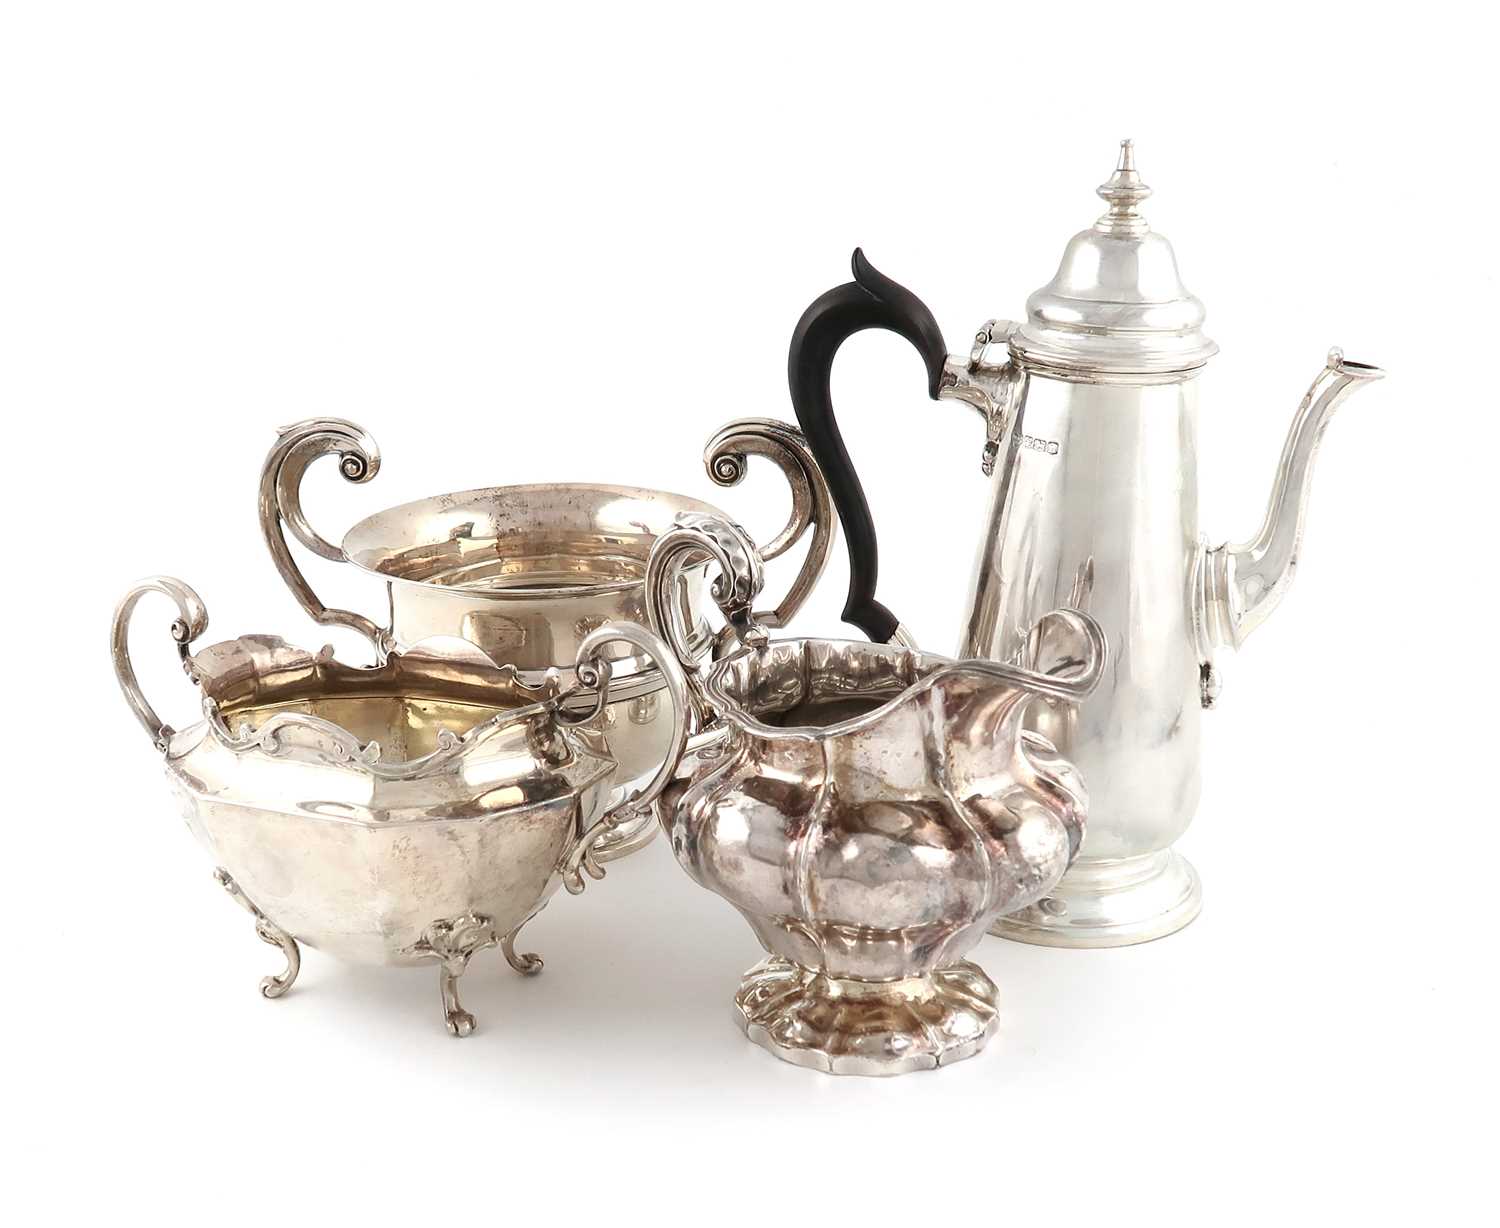 A mixed lot of silver items,comprising: a coffee pot, by Goldsmiths & Silversmiths Co Ltd, Sheffield